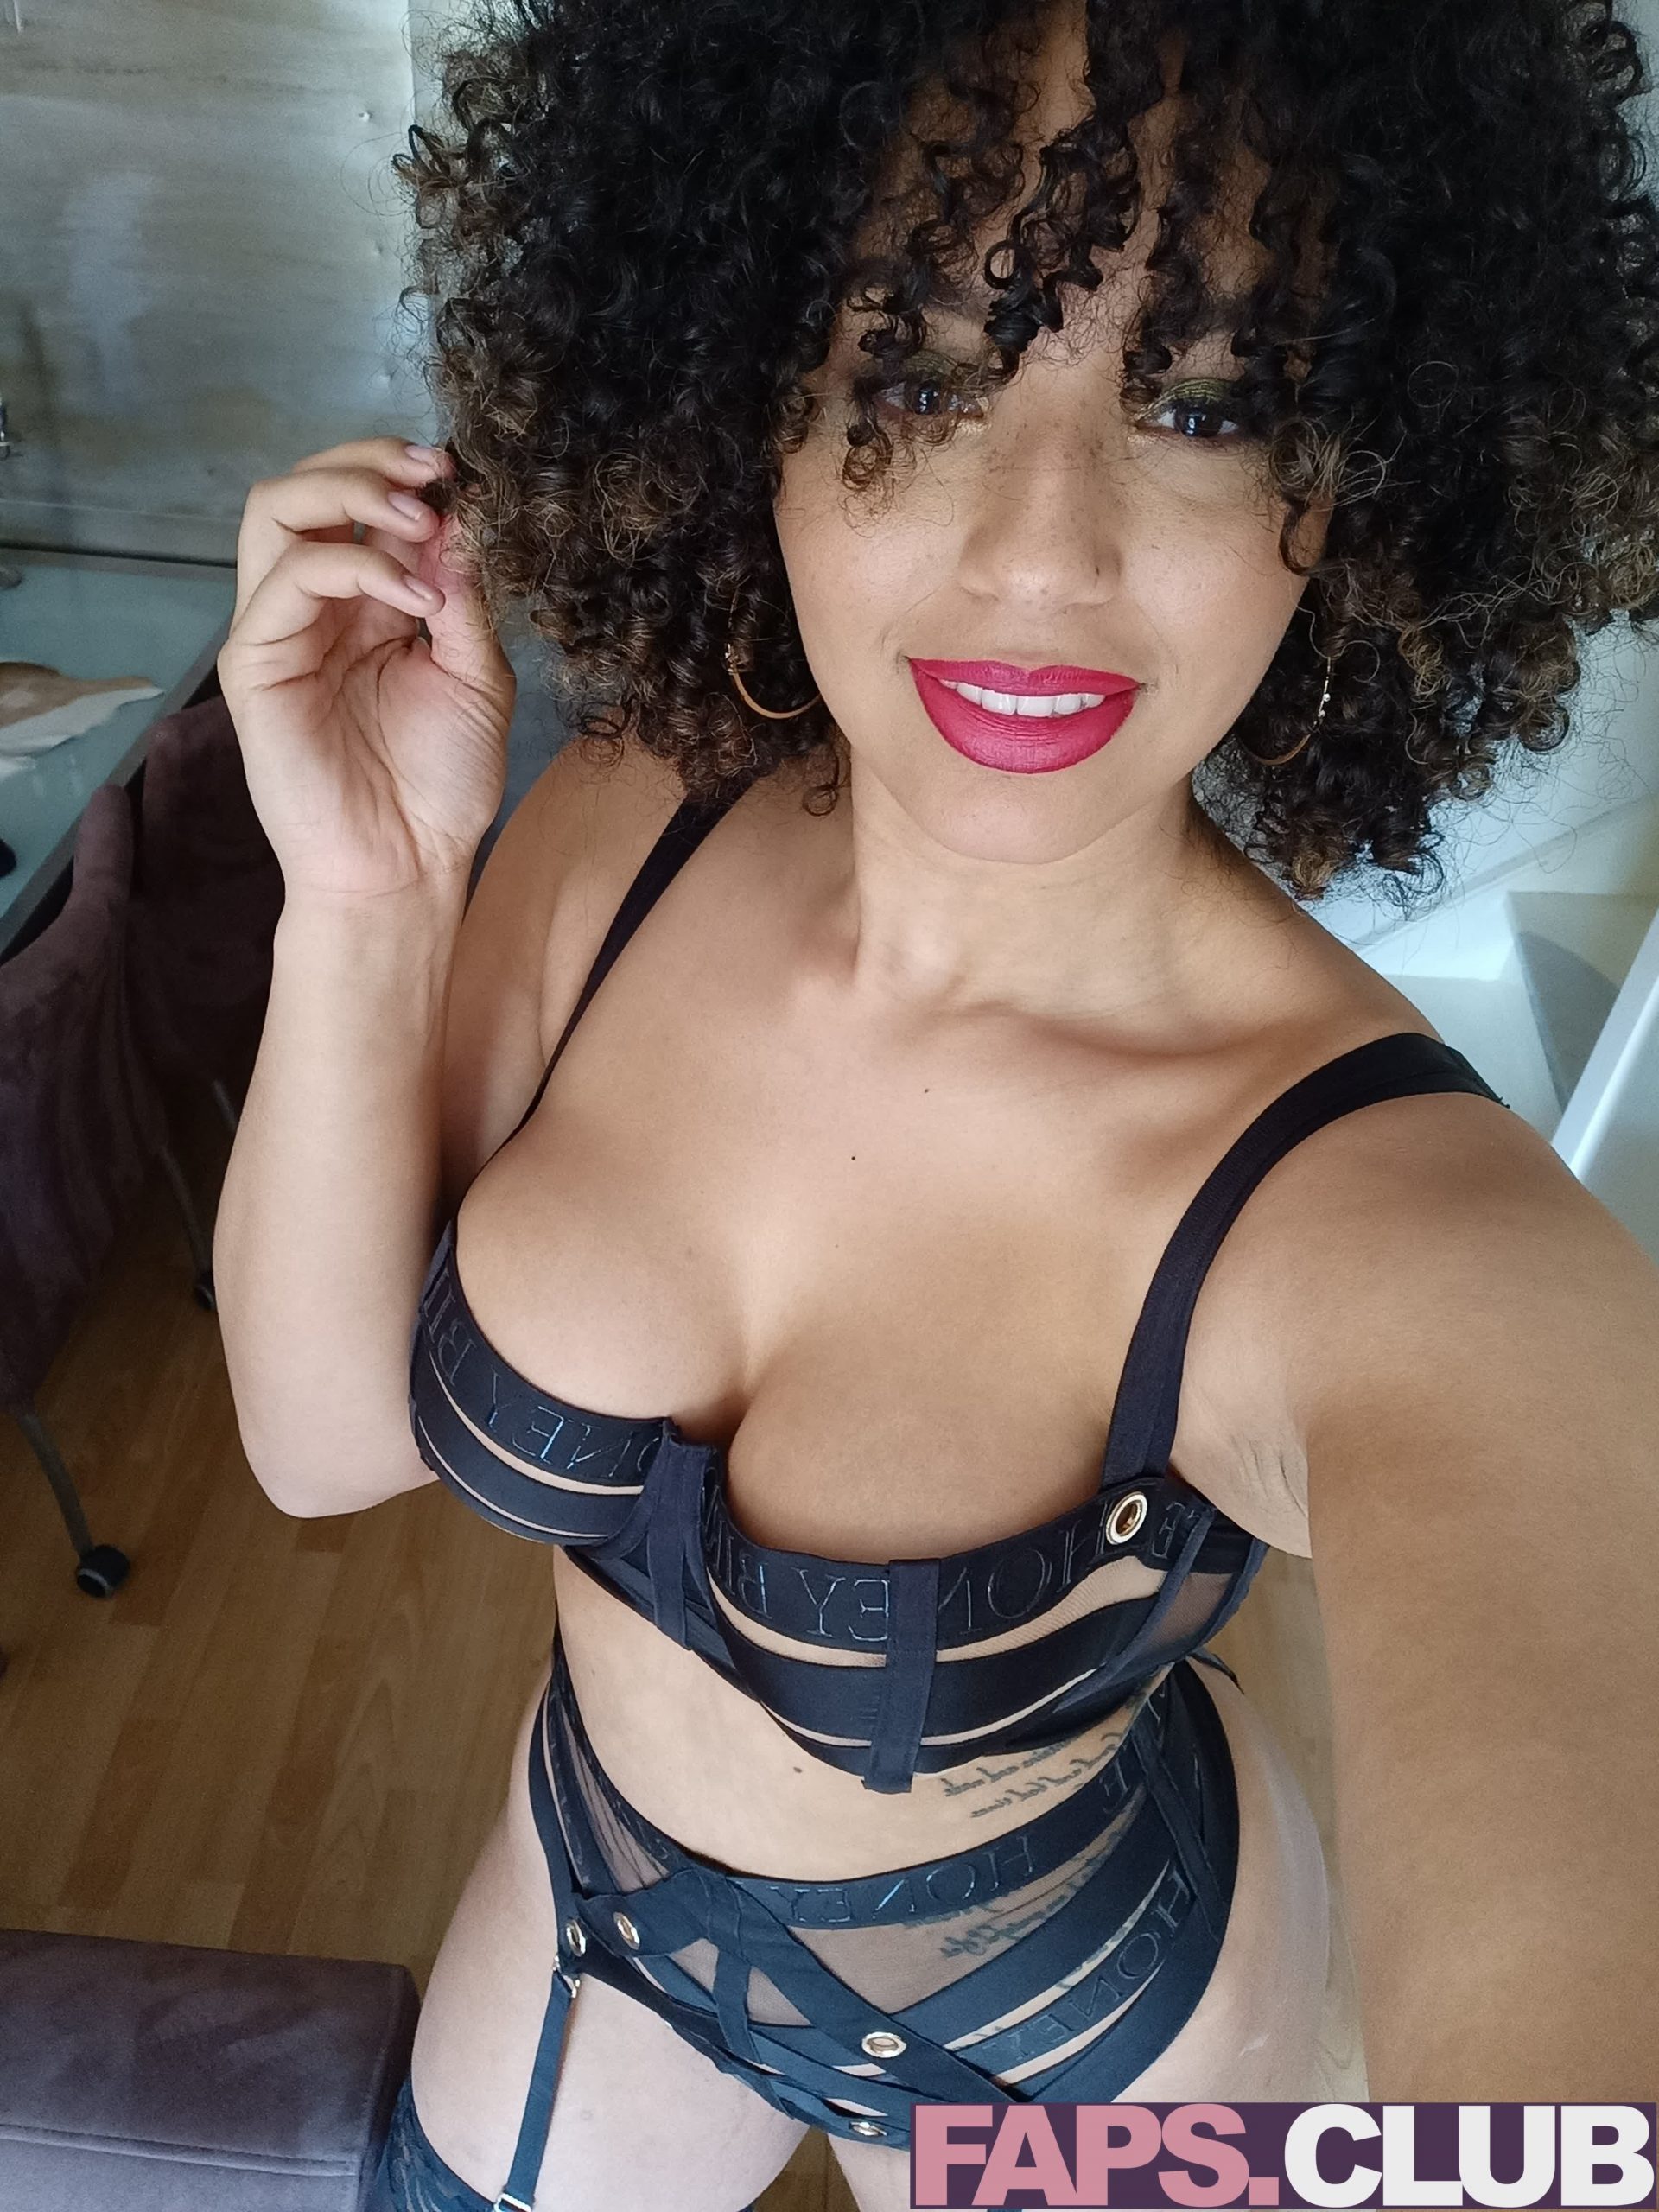 mrs_sophie667 OnlyFans Leaks (25 Photos)